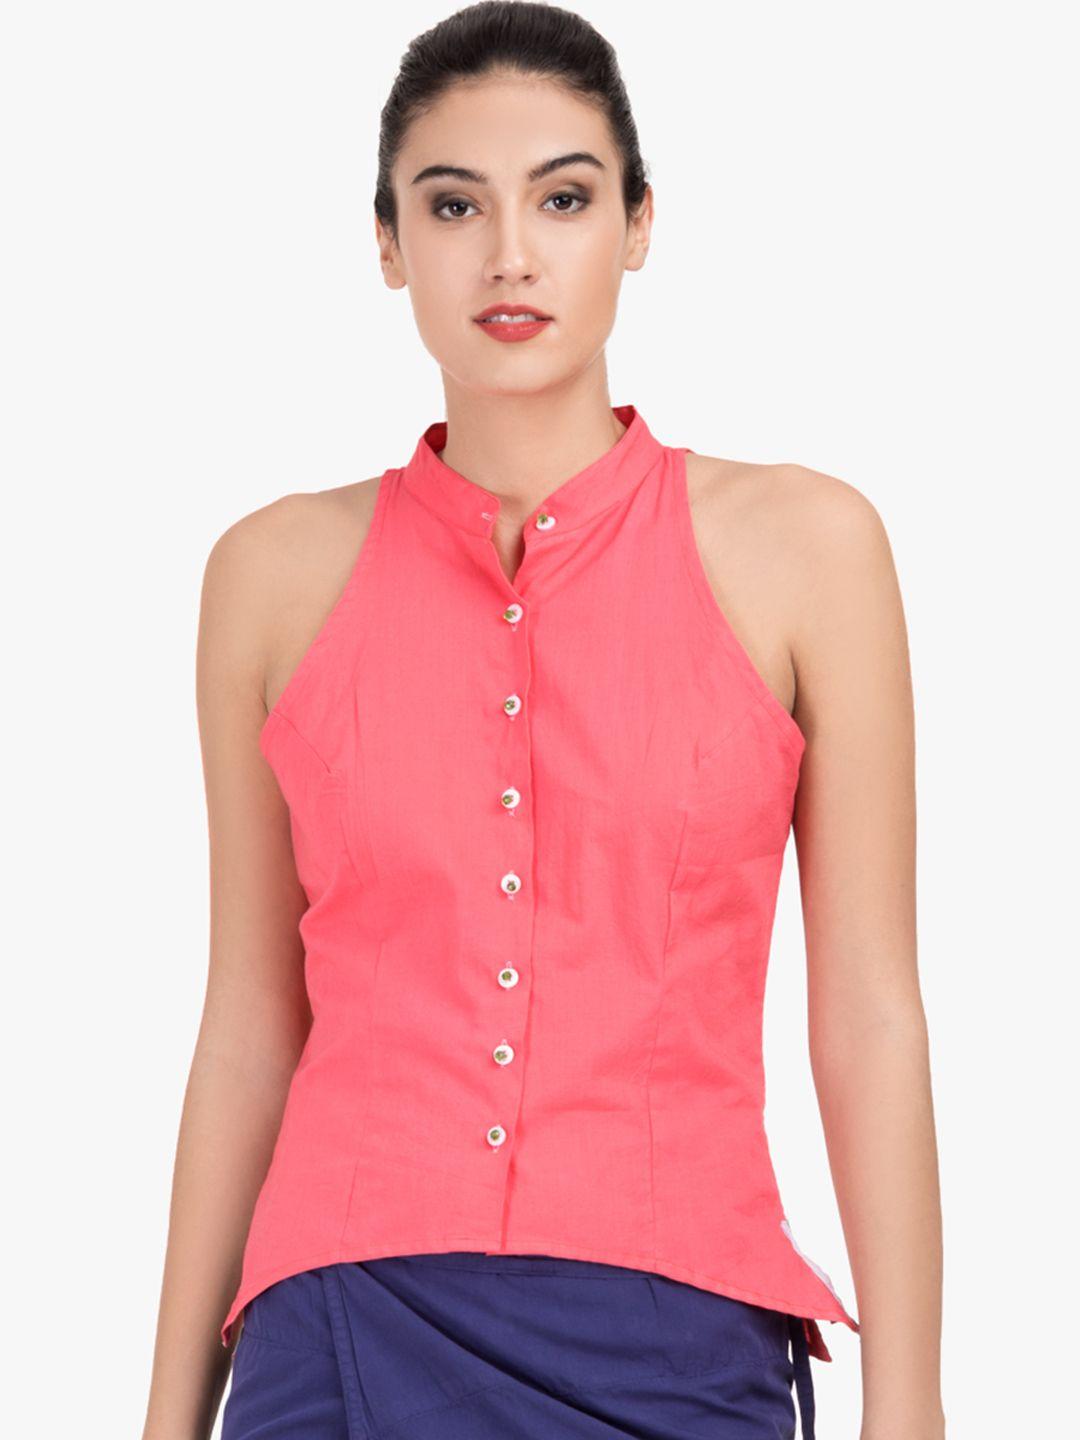 grass-by-gitika-goyal-women-pink-solid-shirt-style-pure-cotton-top